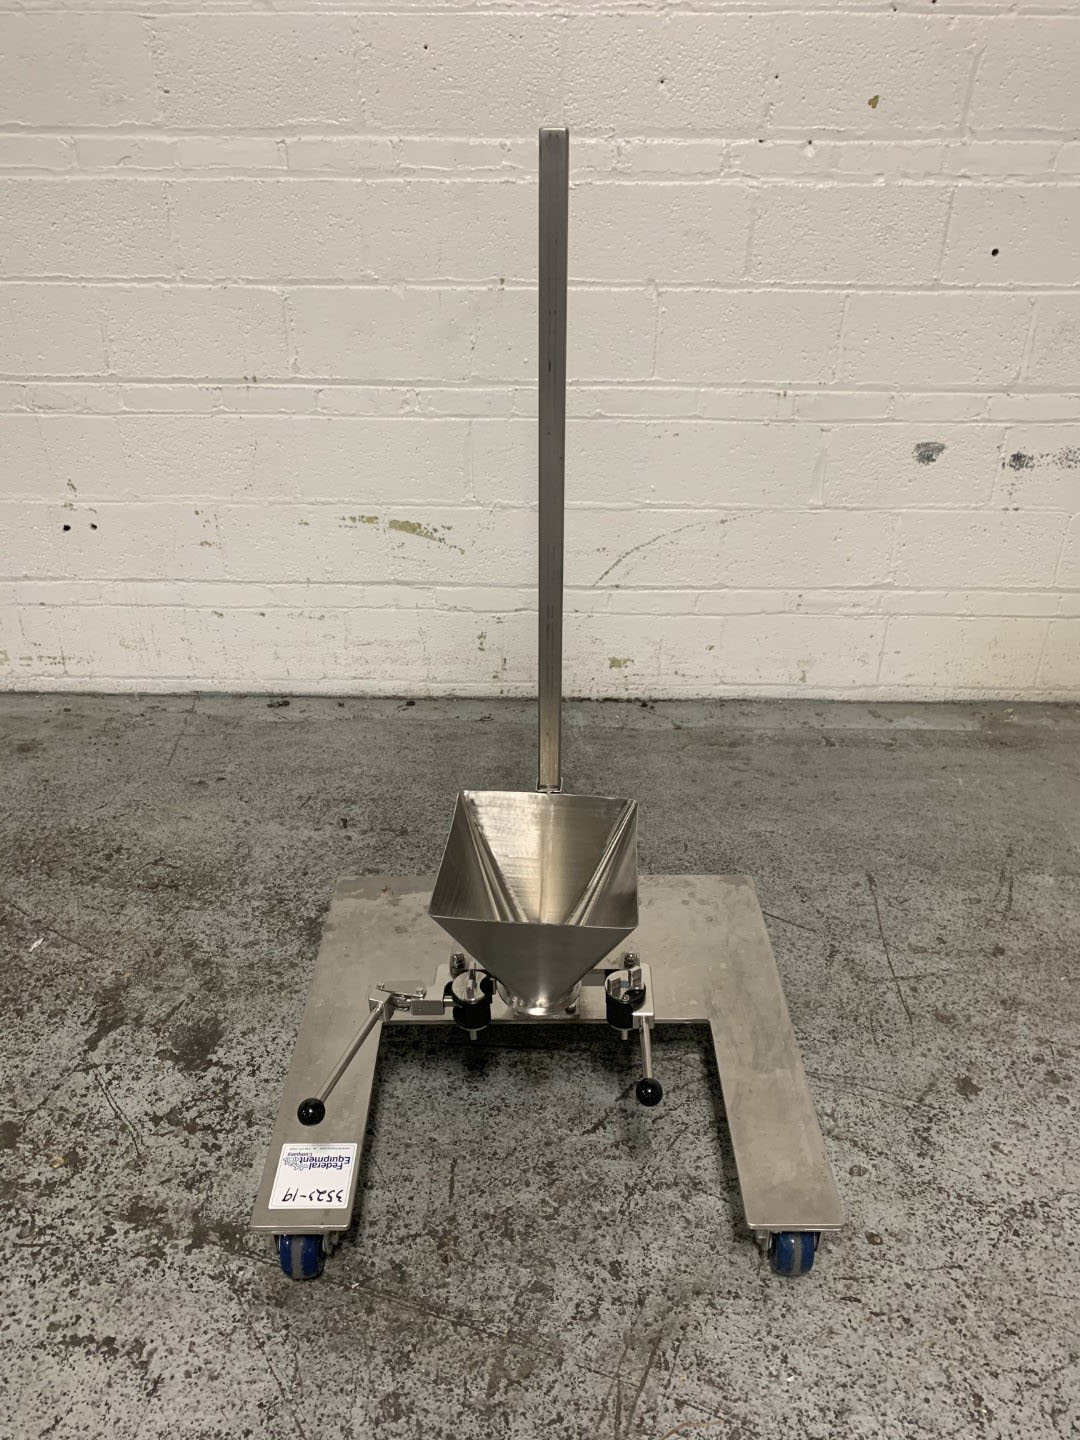 Stainless Steel Hopper on Portable Stand